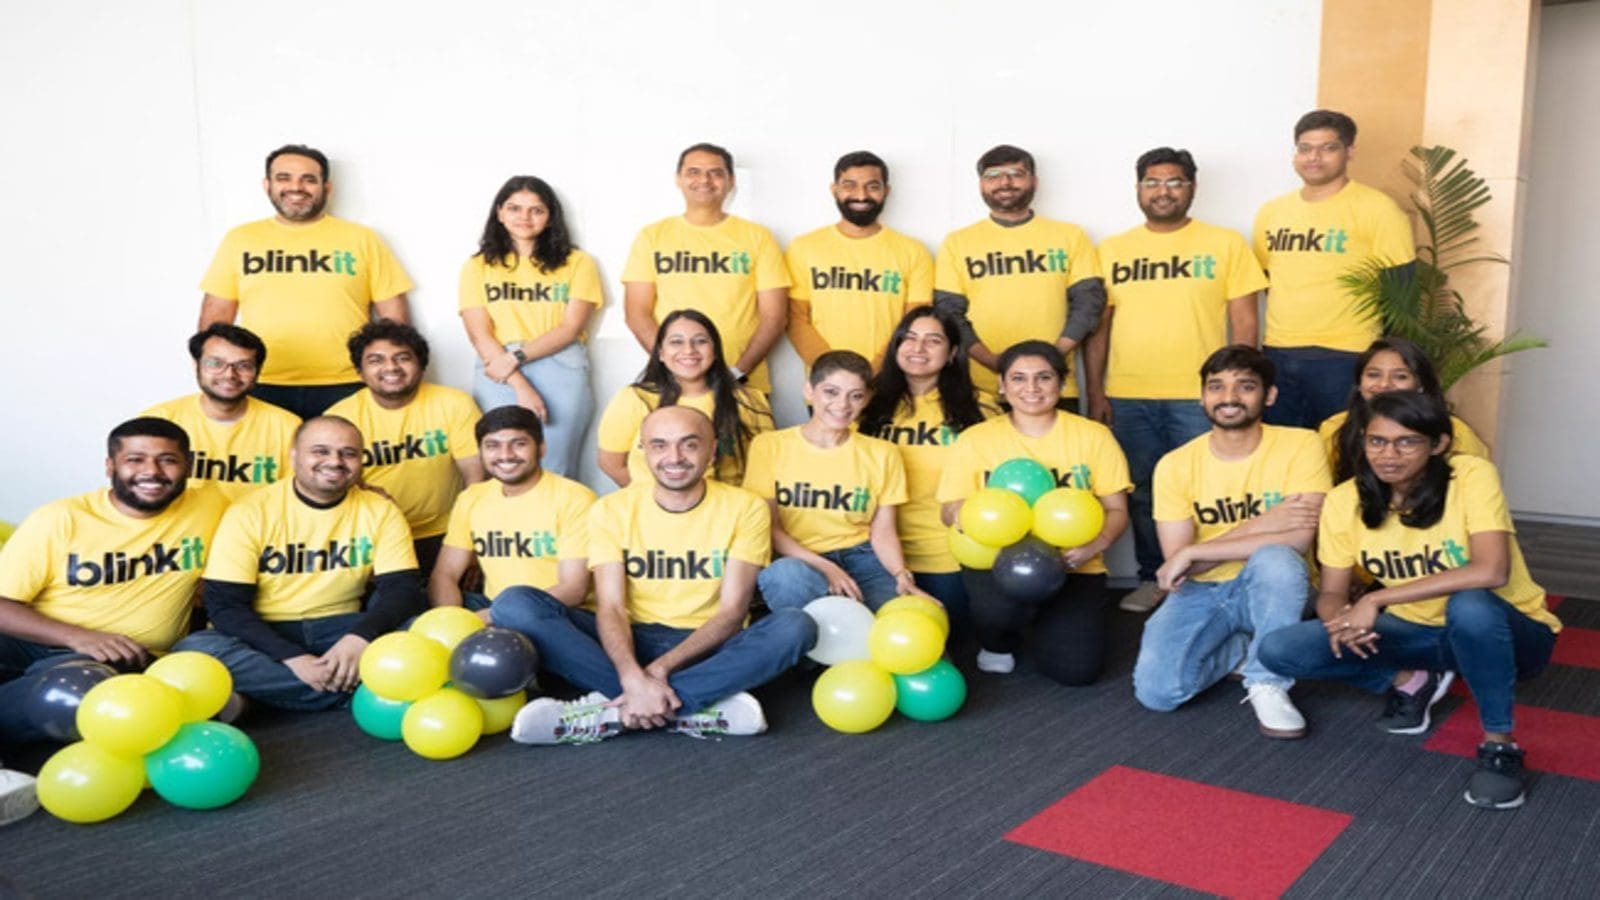 Grofers rebrands to Blinkit to portray accelerated transition to quick commerce